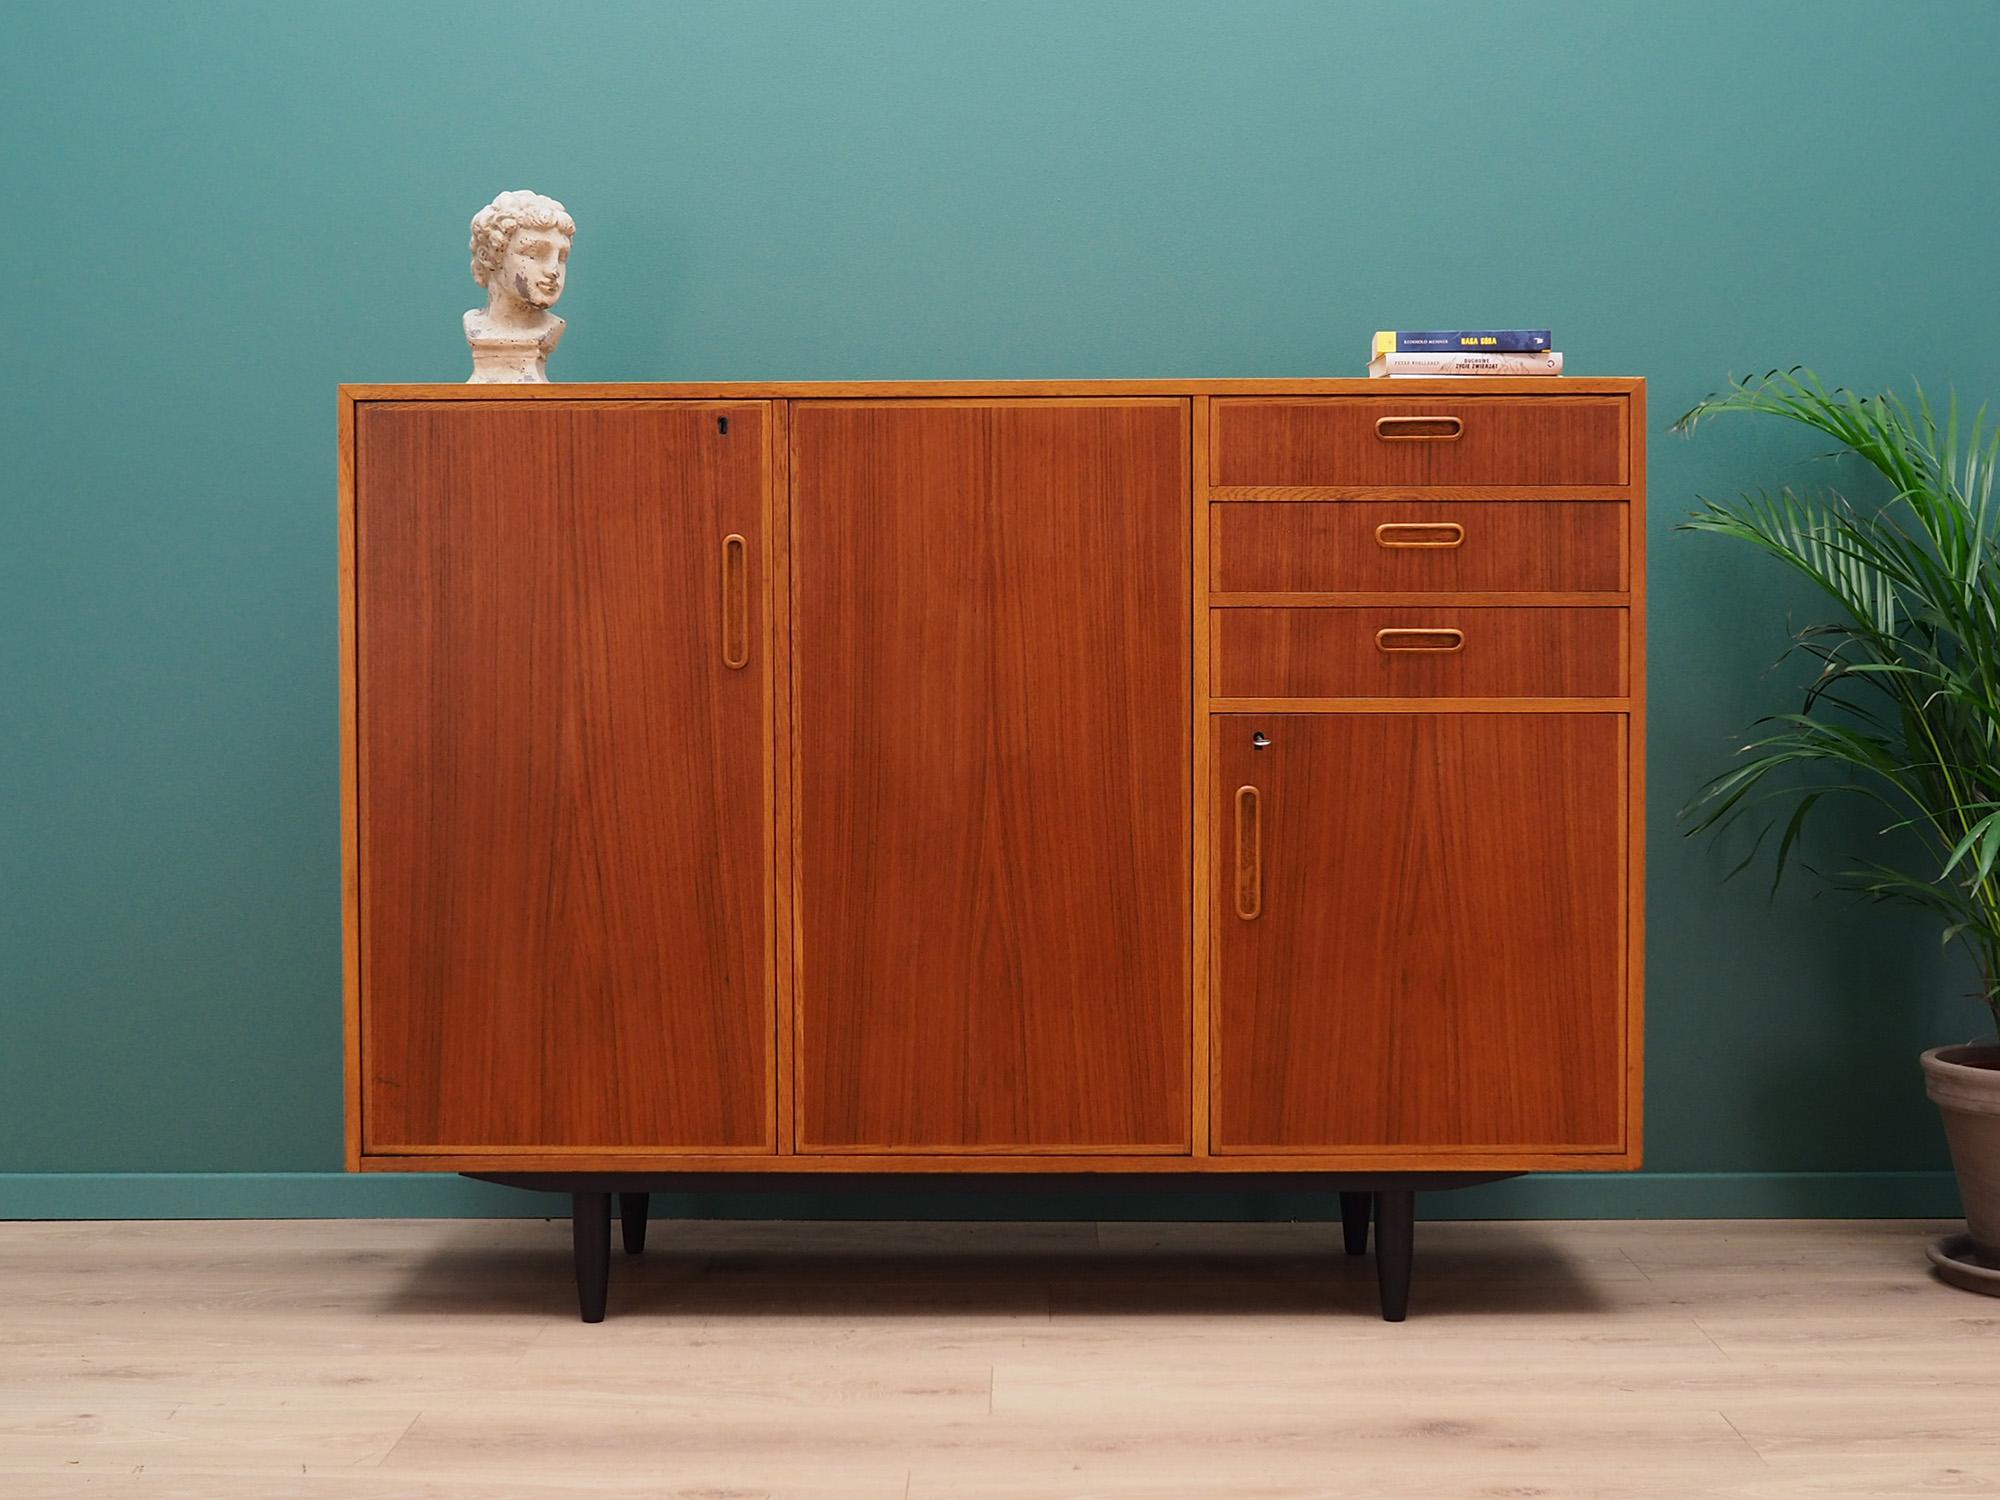 Superb highboard from the 1960s-1970s. Scandinavian design, Minimalist form. Furniture finished with teak veneer. Highboard has a spacious interior with shelves and three packed drawers. Key included. Preserved in good condition (minor bruises and